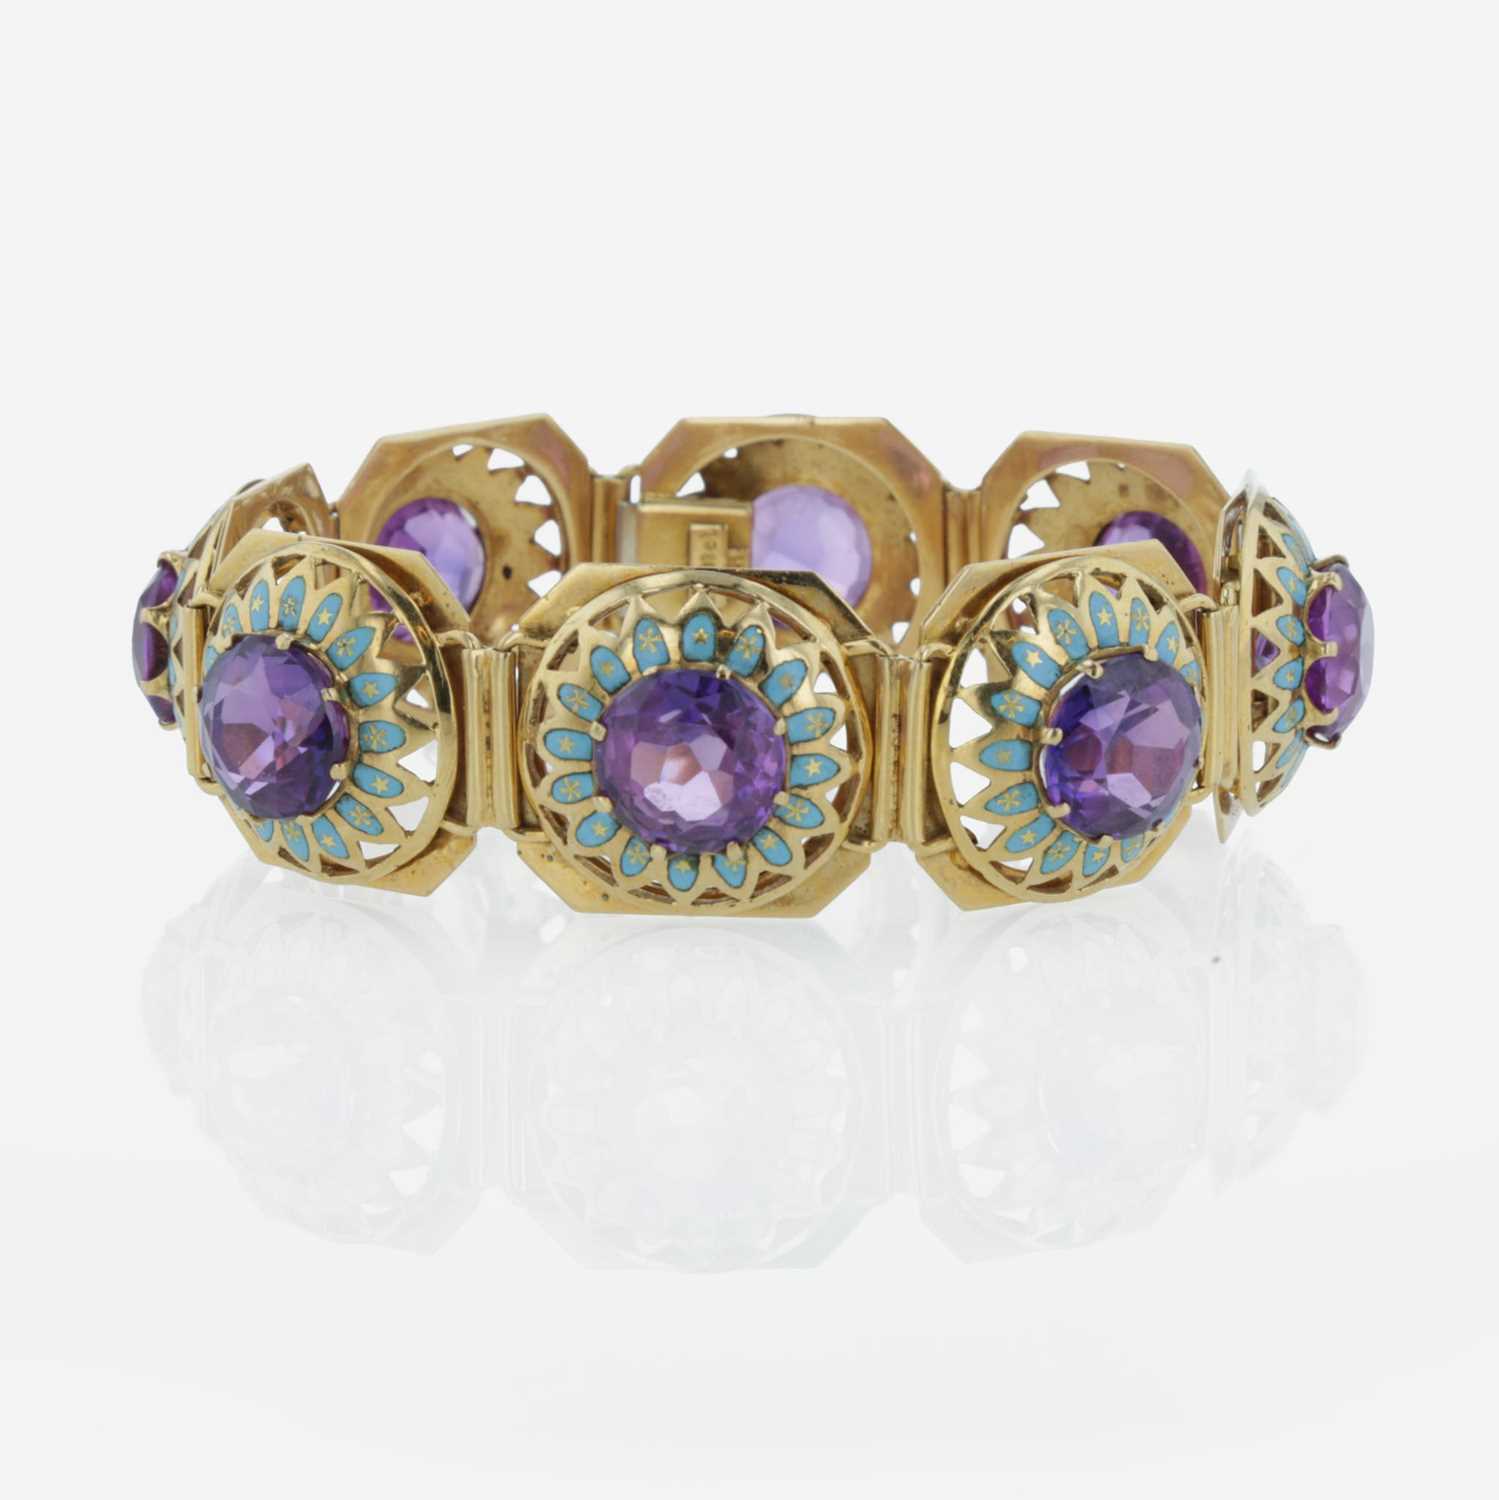 Lot 34 - An 18K yellow gold, synthetic sapphire, and enamel bracelet